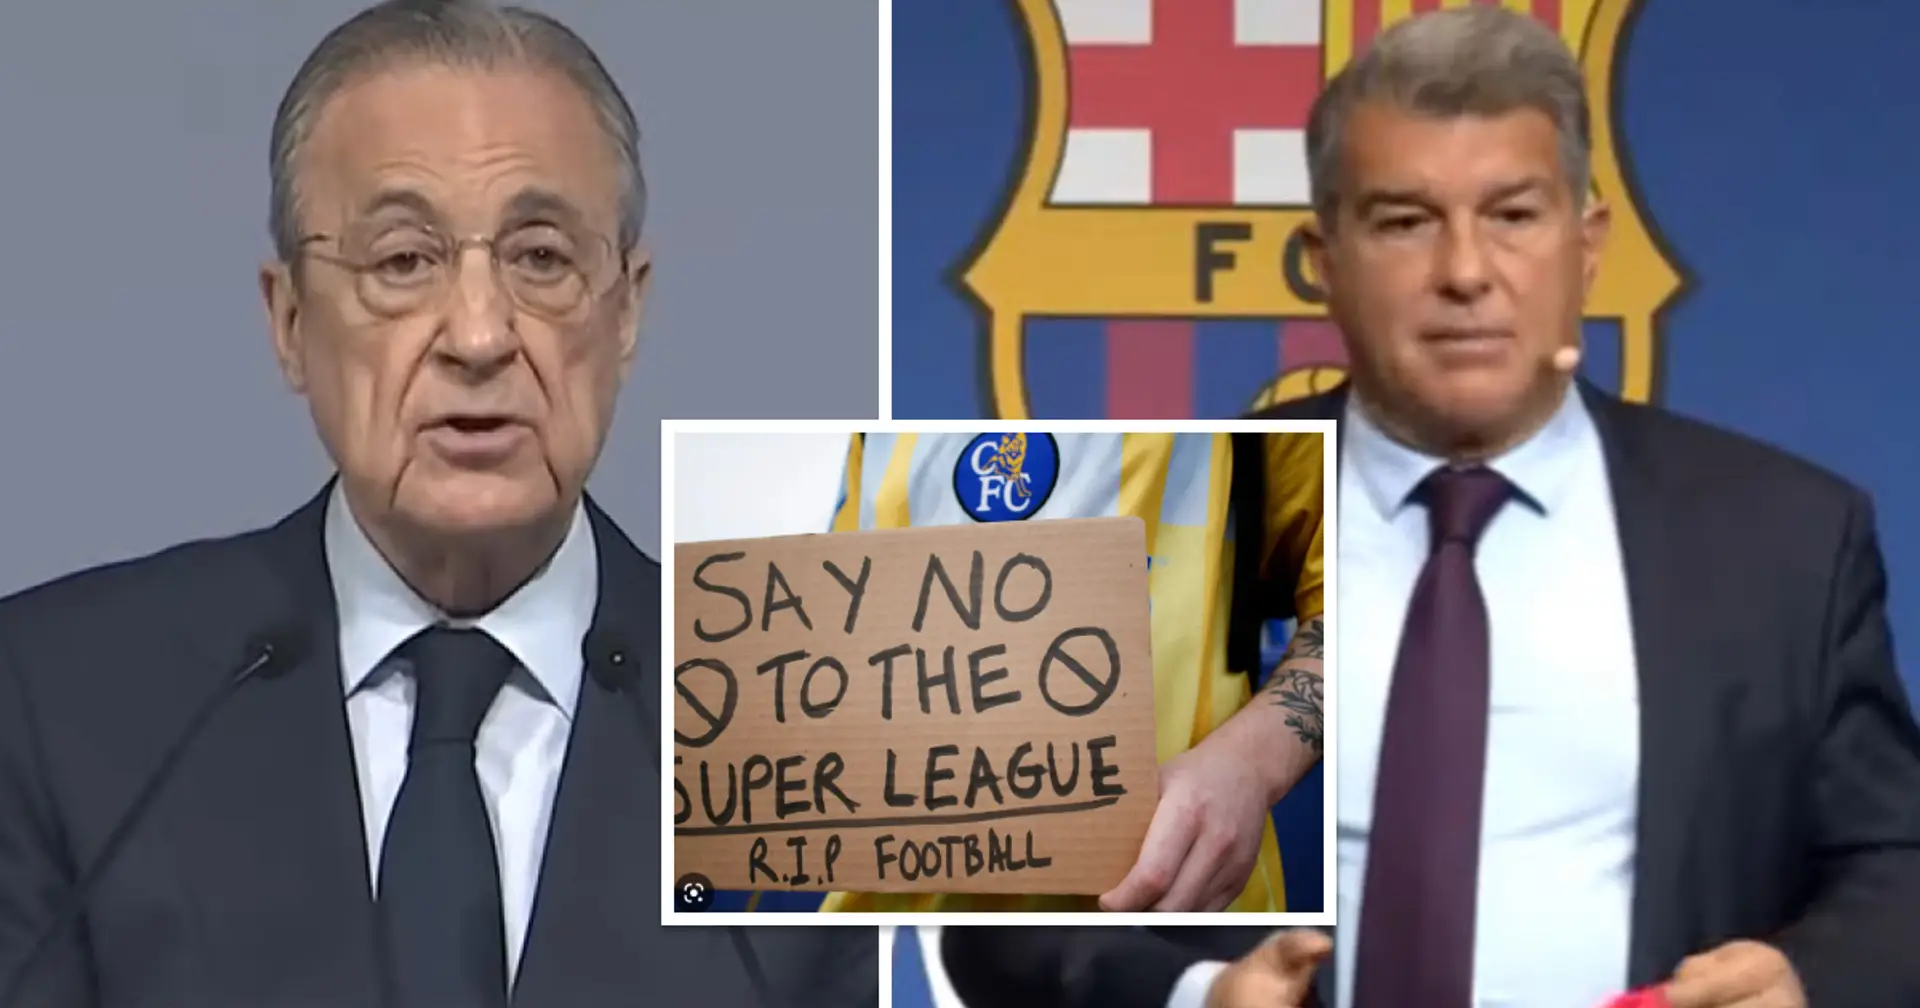 Dead or alive? Here's what's going on with Florentino Perez's plan to save football - latest